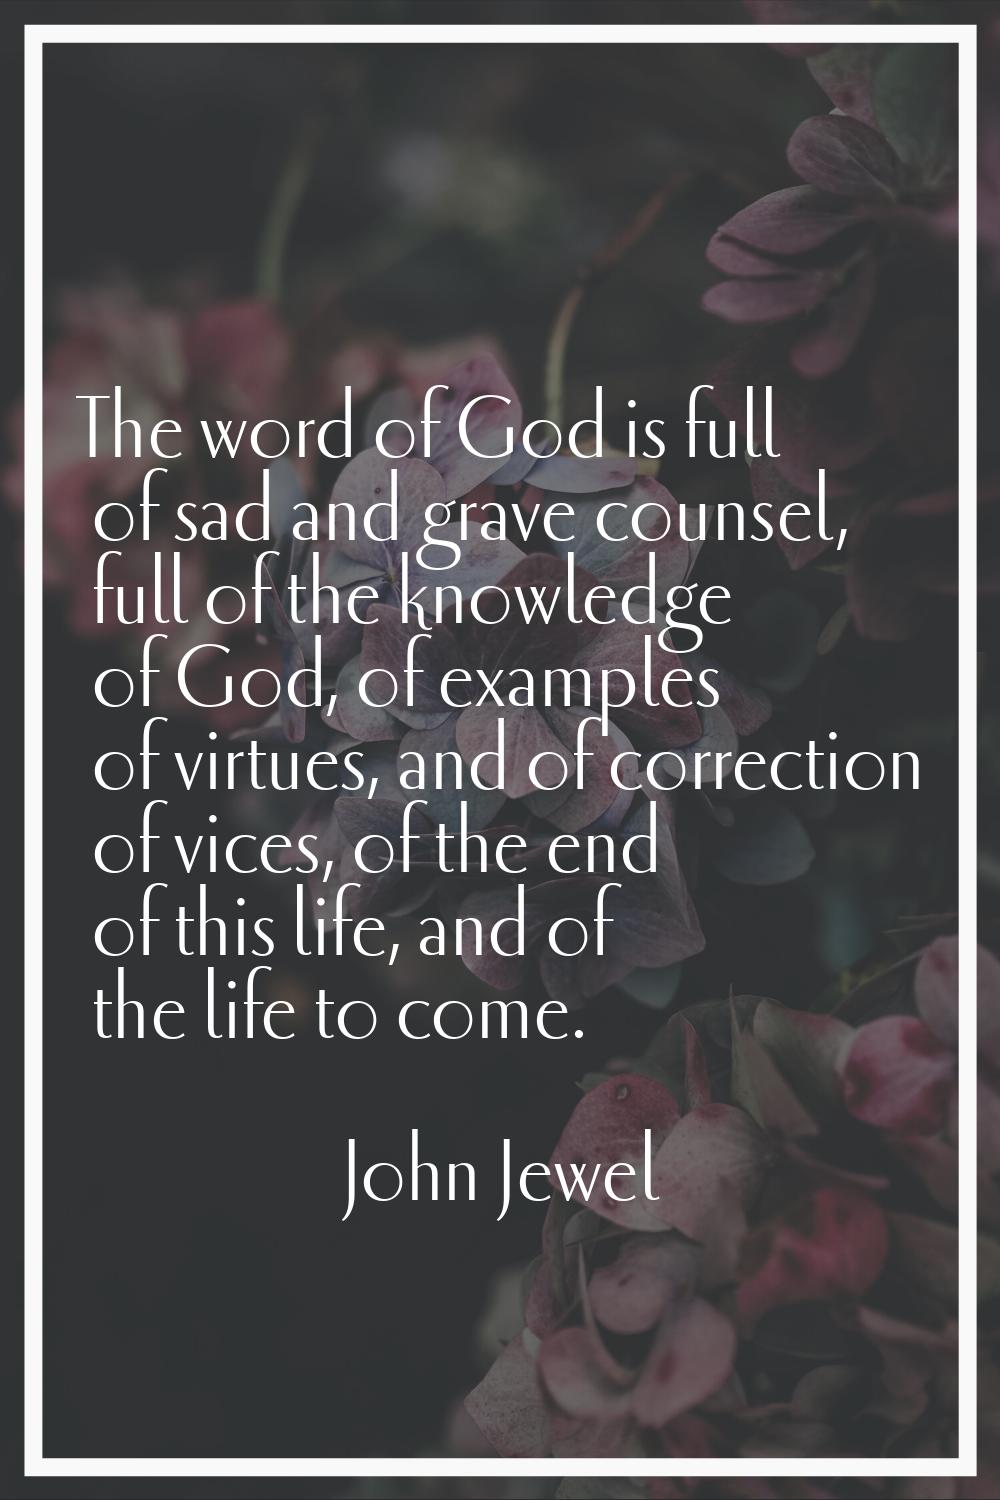 The word of God is full of sad and grave counsel, full of the knowledge of God, of examples of virt